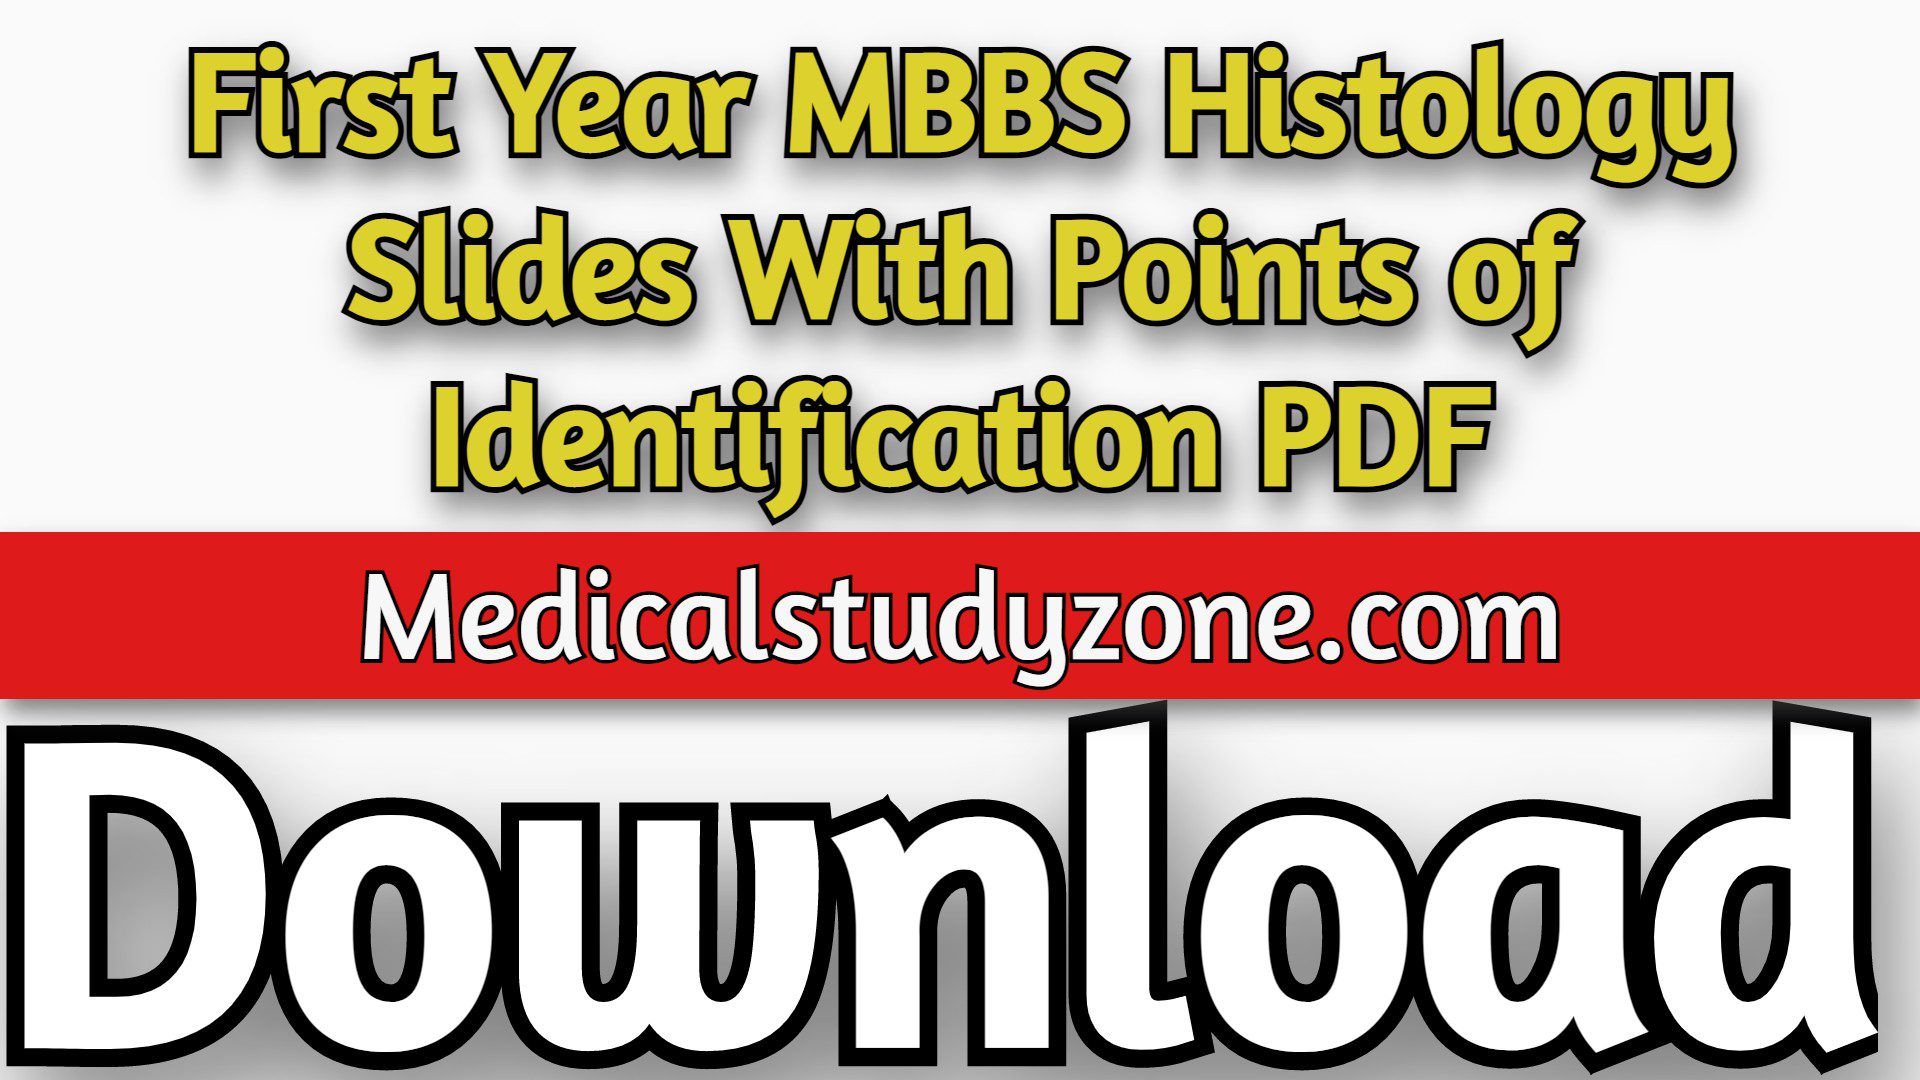 First Year MBBS Histology Slides With Points of Identification PDF Free Download